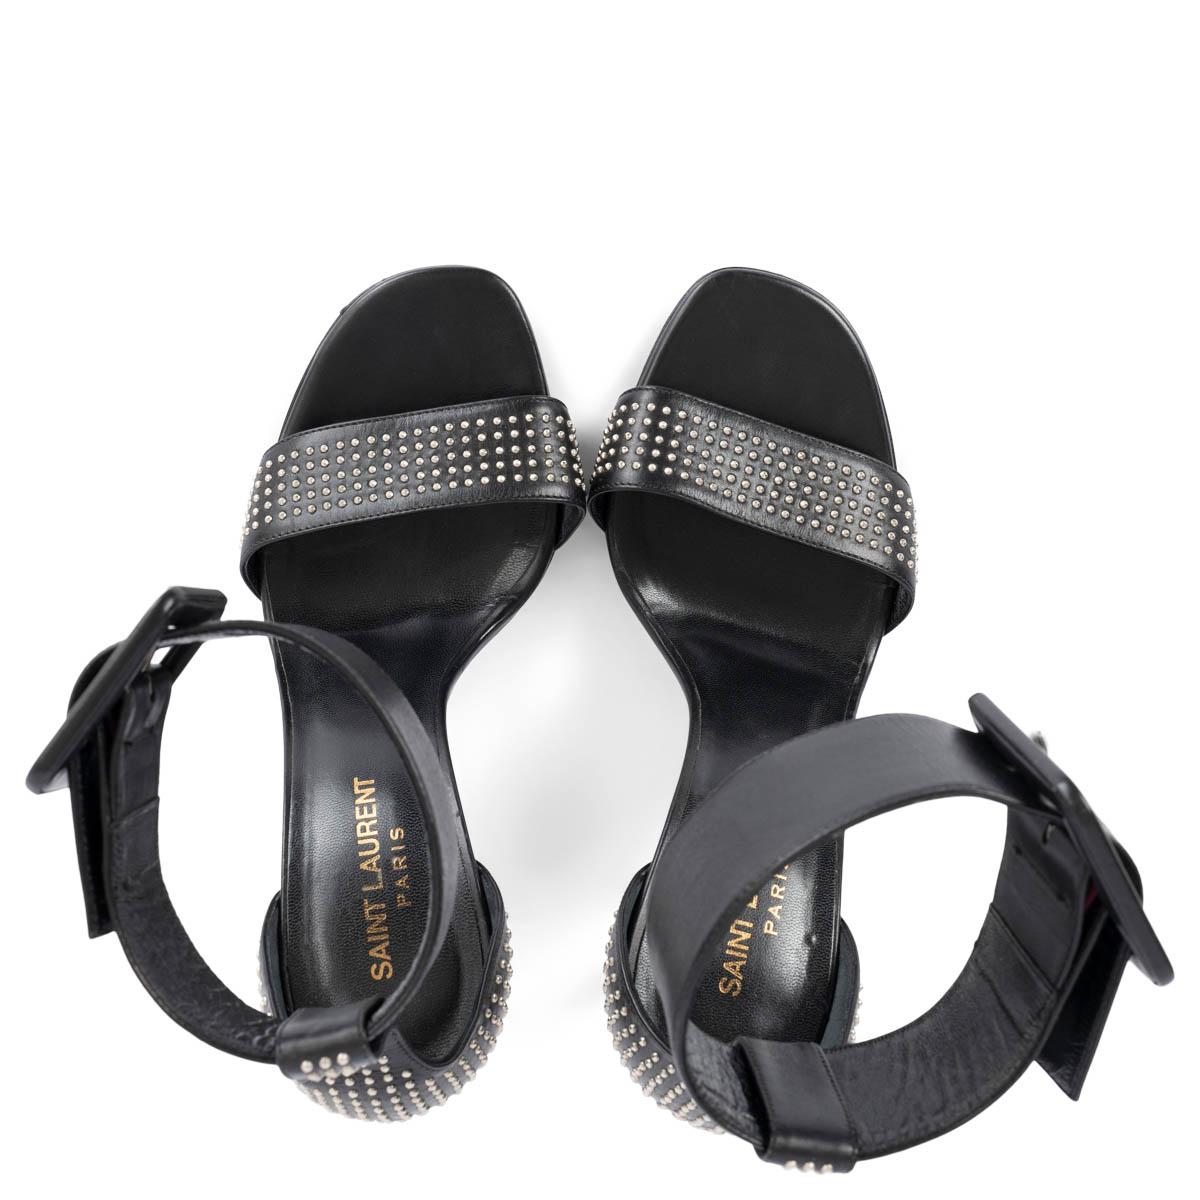 SAINT LAURENT black leather JANE 106 STUDDED Sandals Shoes 38 In Excellent Condition For Sale In Zürich, CH